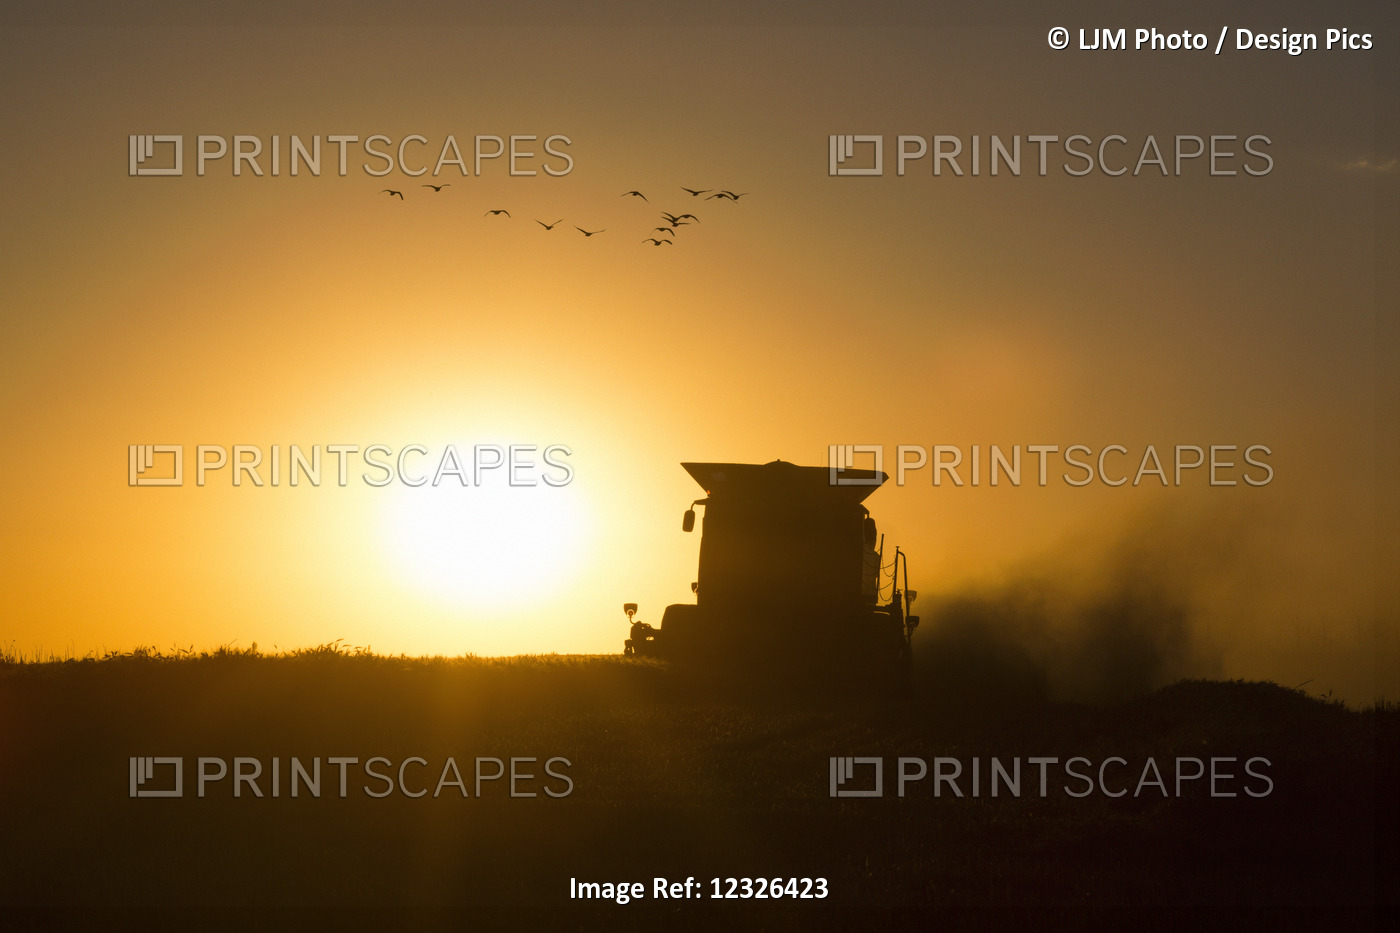 Harvesting Wheat In Late Autumn At Sunset With A Small Flock Of Geese Overhead; ...